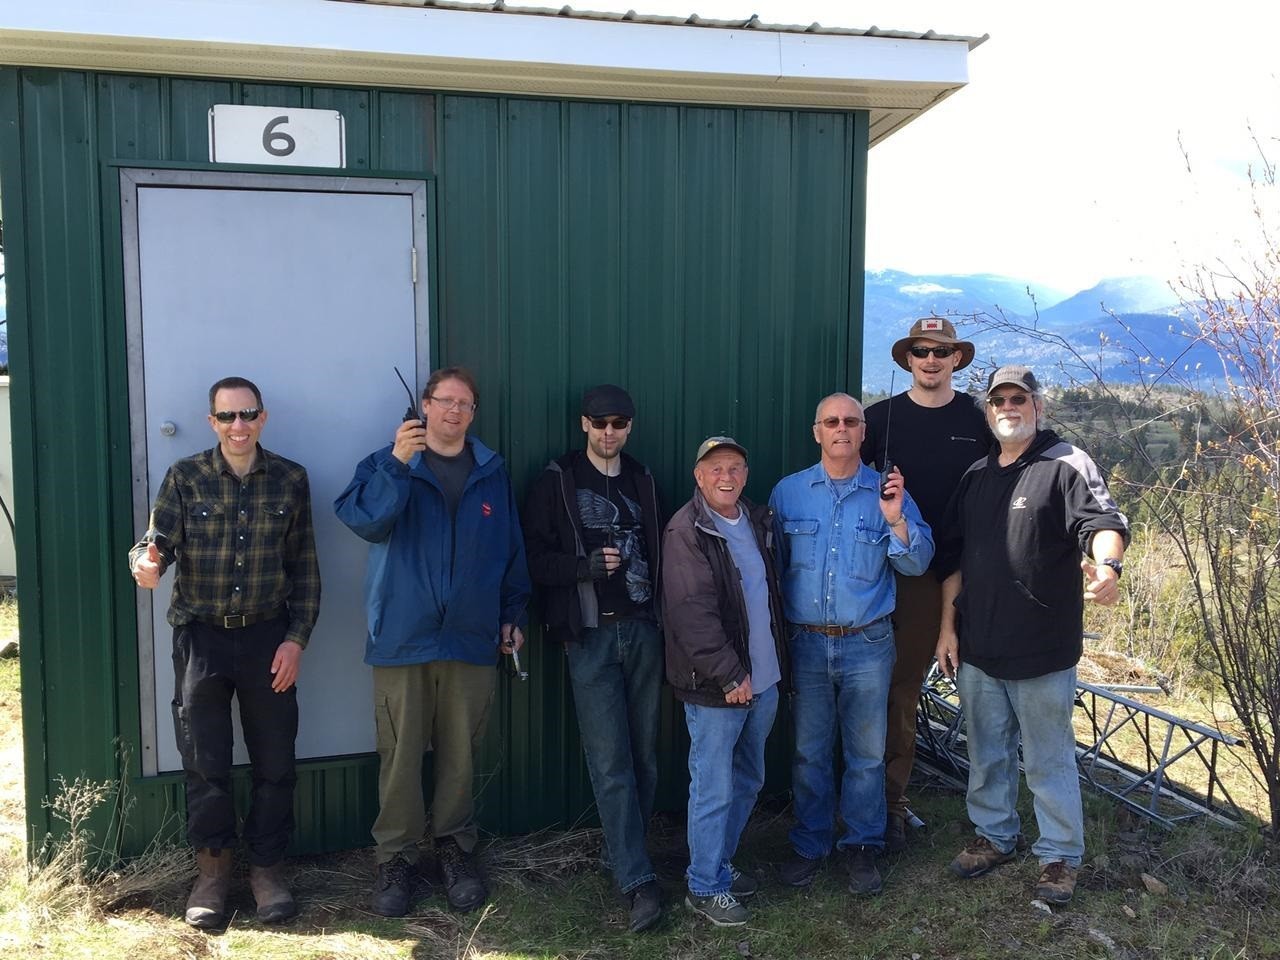 The 
7 of us in front of the repeater shed...